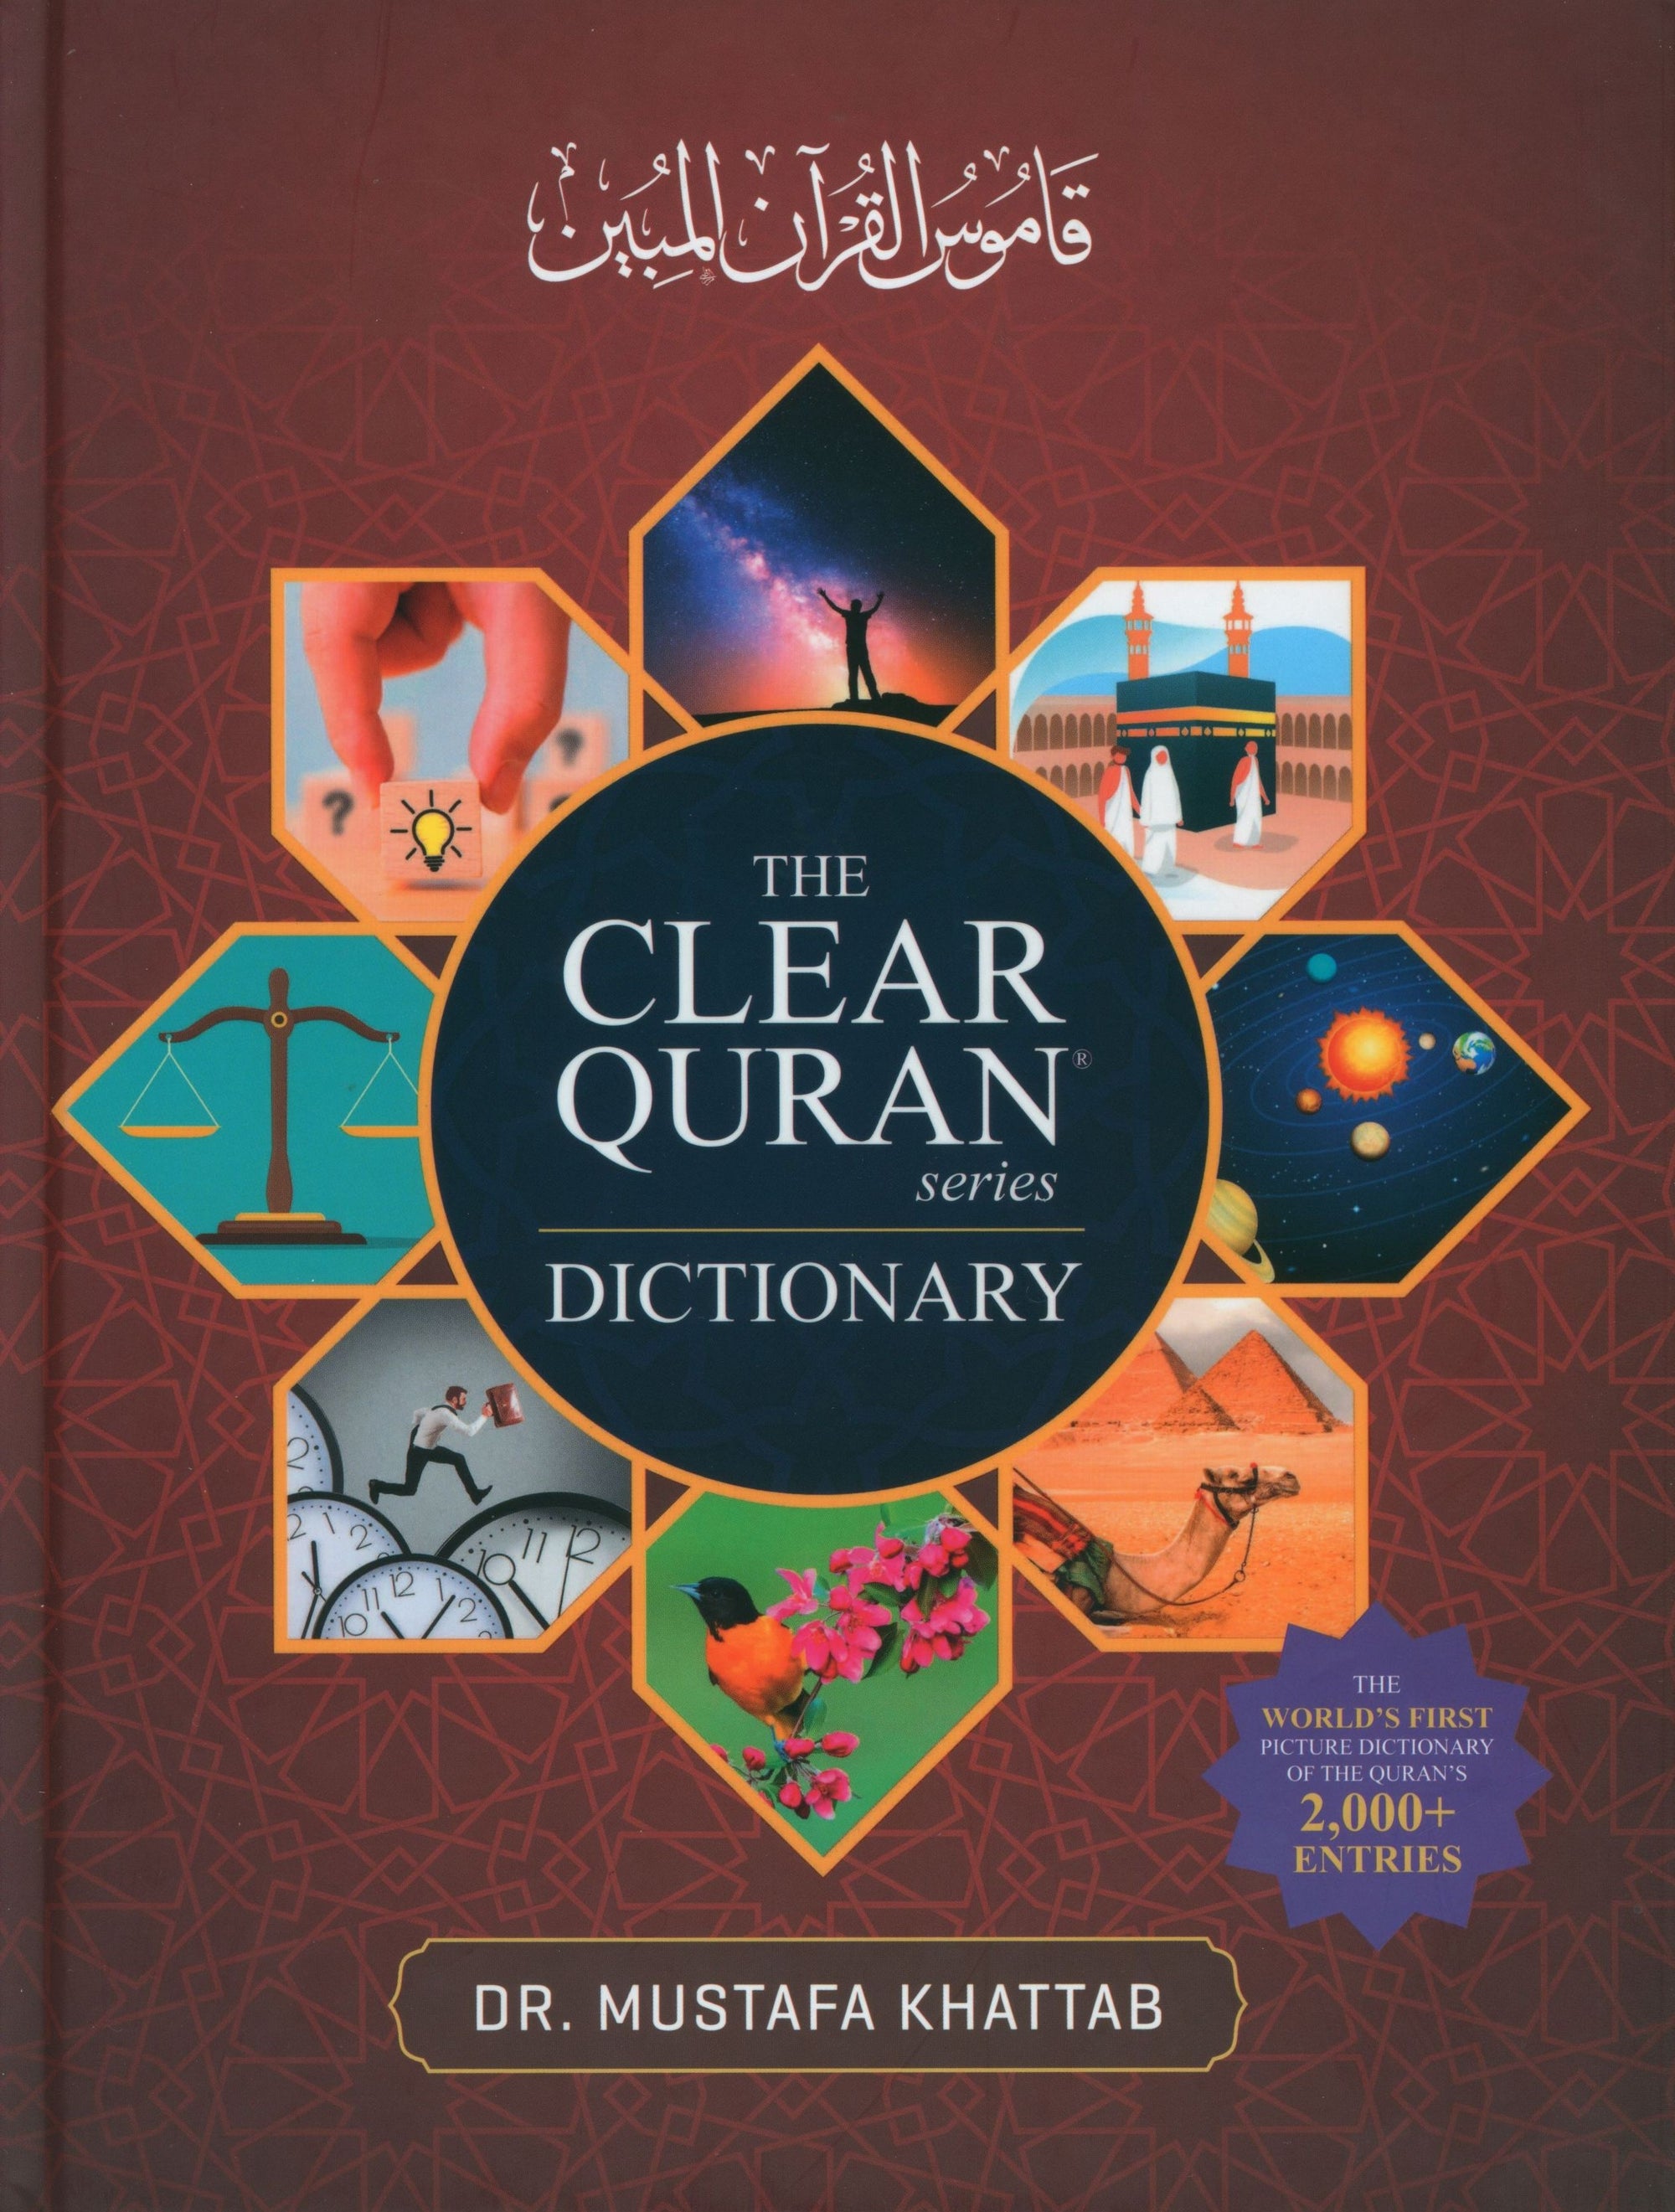 The Clear Quran Series Dictionary